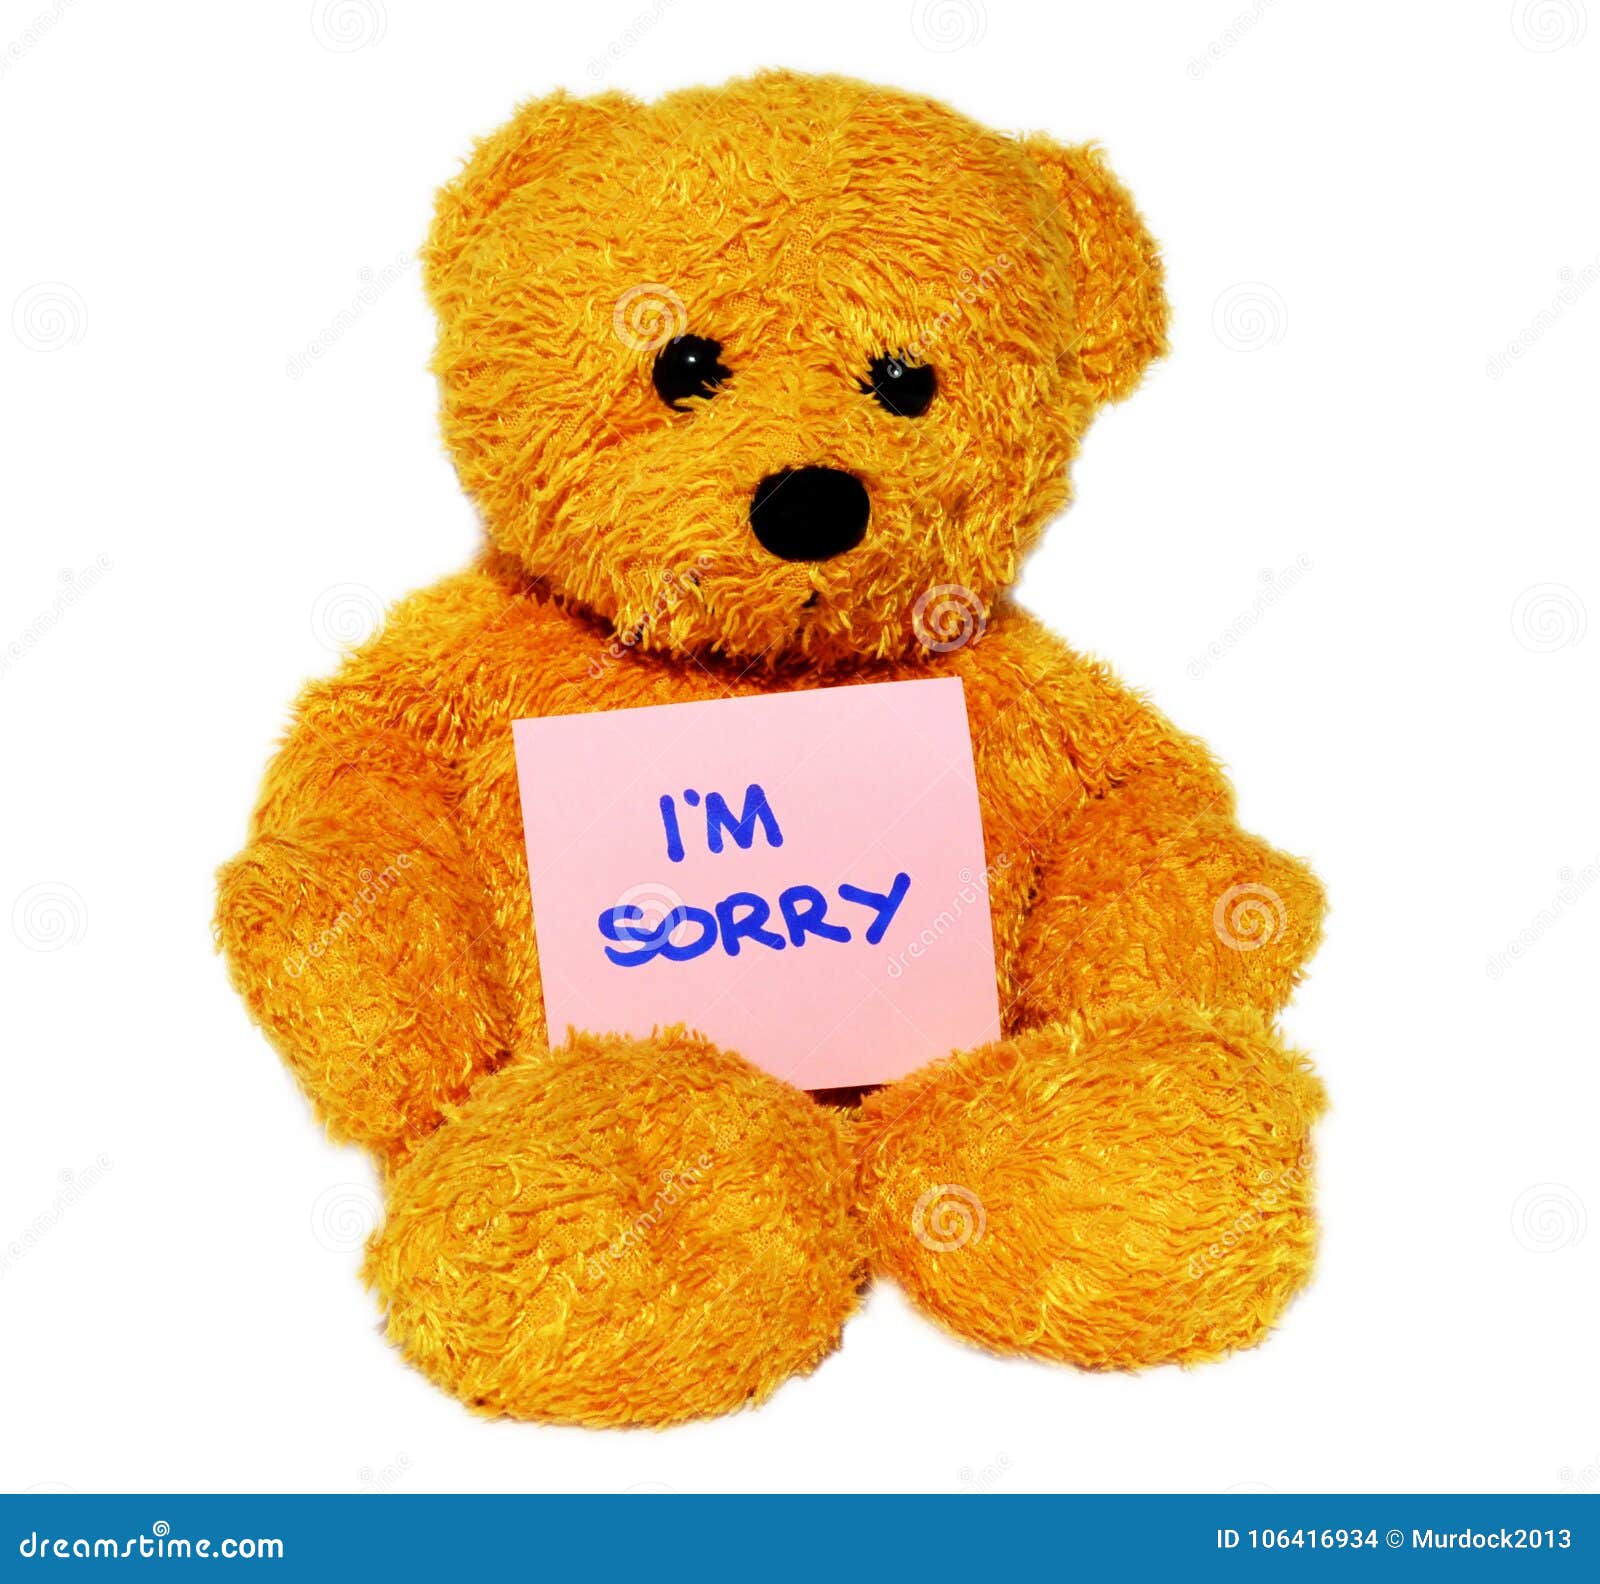 Im Sorry teddy bear stock photo. Image of isolated, concept ...